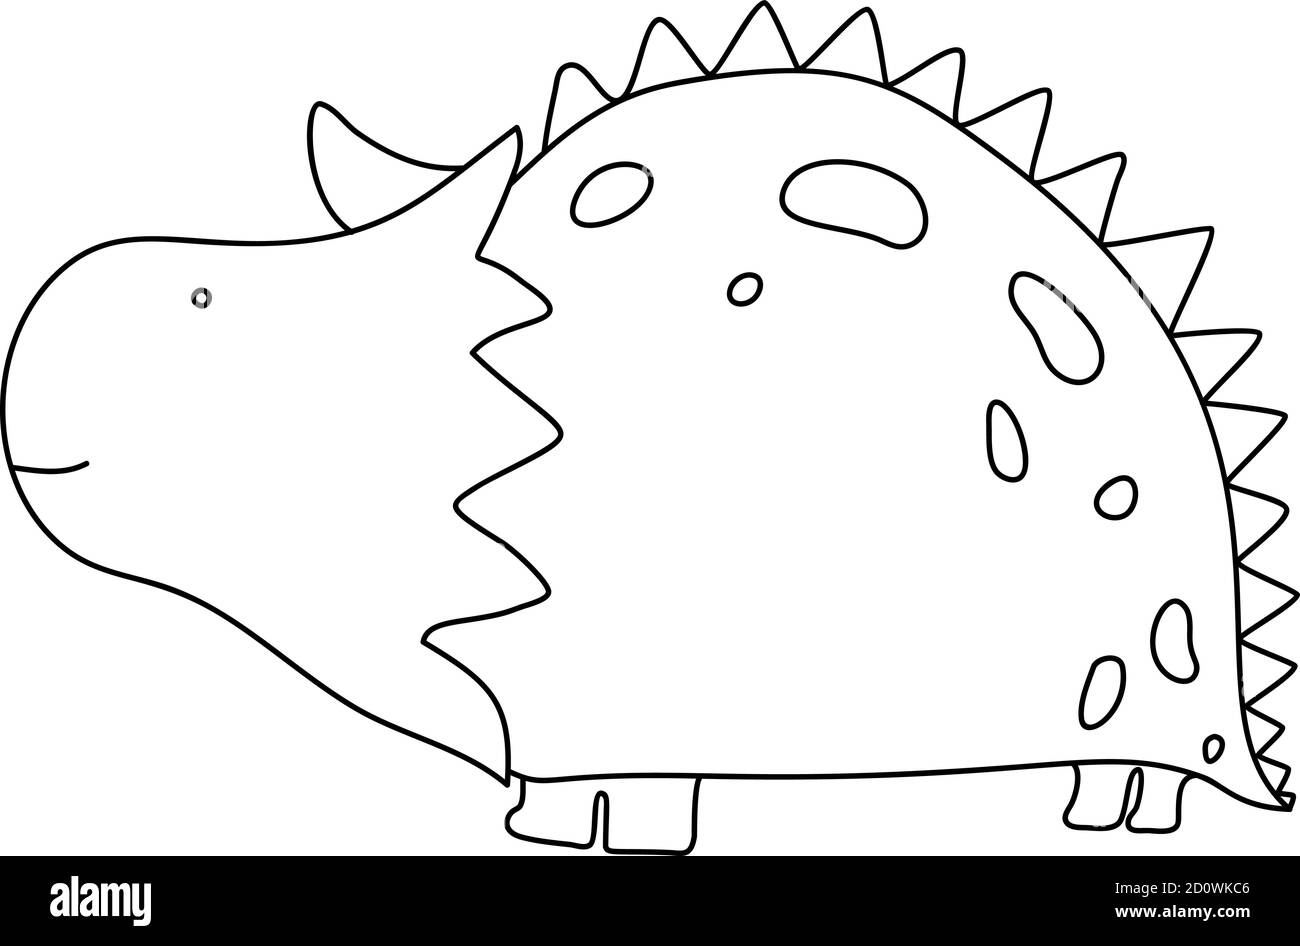 Little cute line dinosaur. Vector illustration for coloring drawing ...